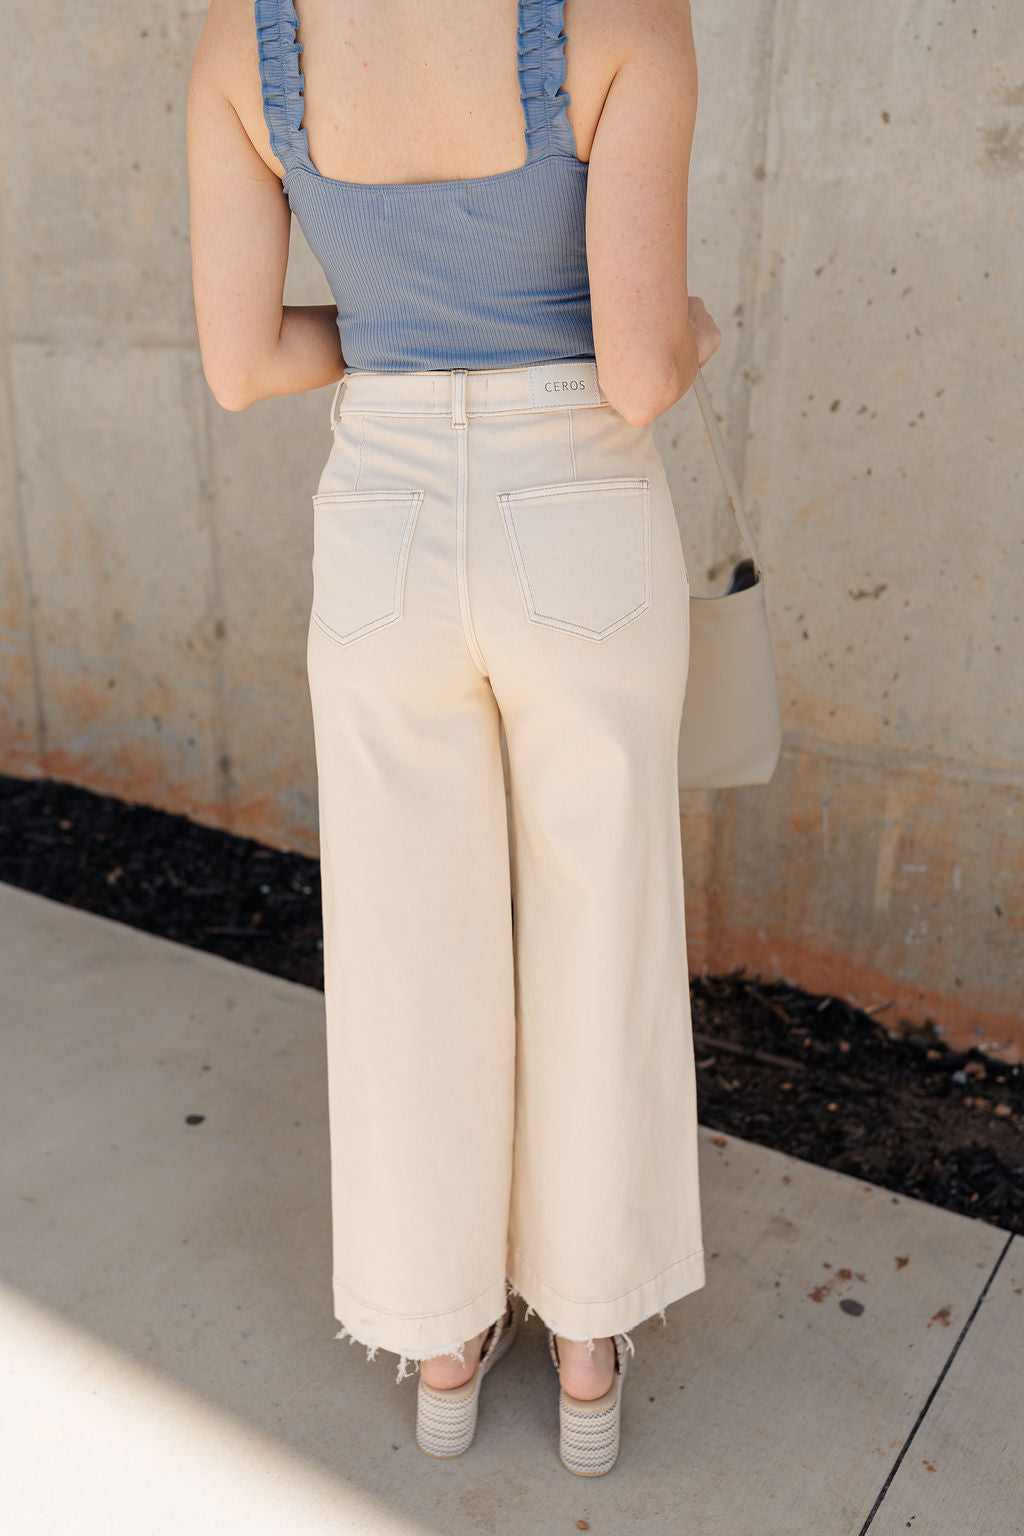 Back view of model wearing the Ceros: Florence Ecru Wide Leg Jeans which features ecru denim fabric, a front zipper with a button closure, belt loops, a super high-rise waist, two front pockets, two back pockets, and wide cropped legs with distressed hems.